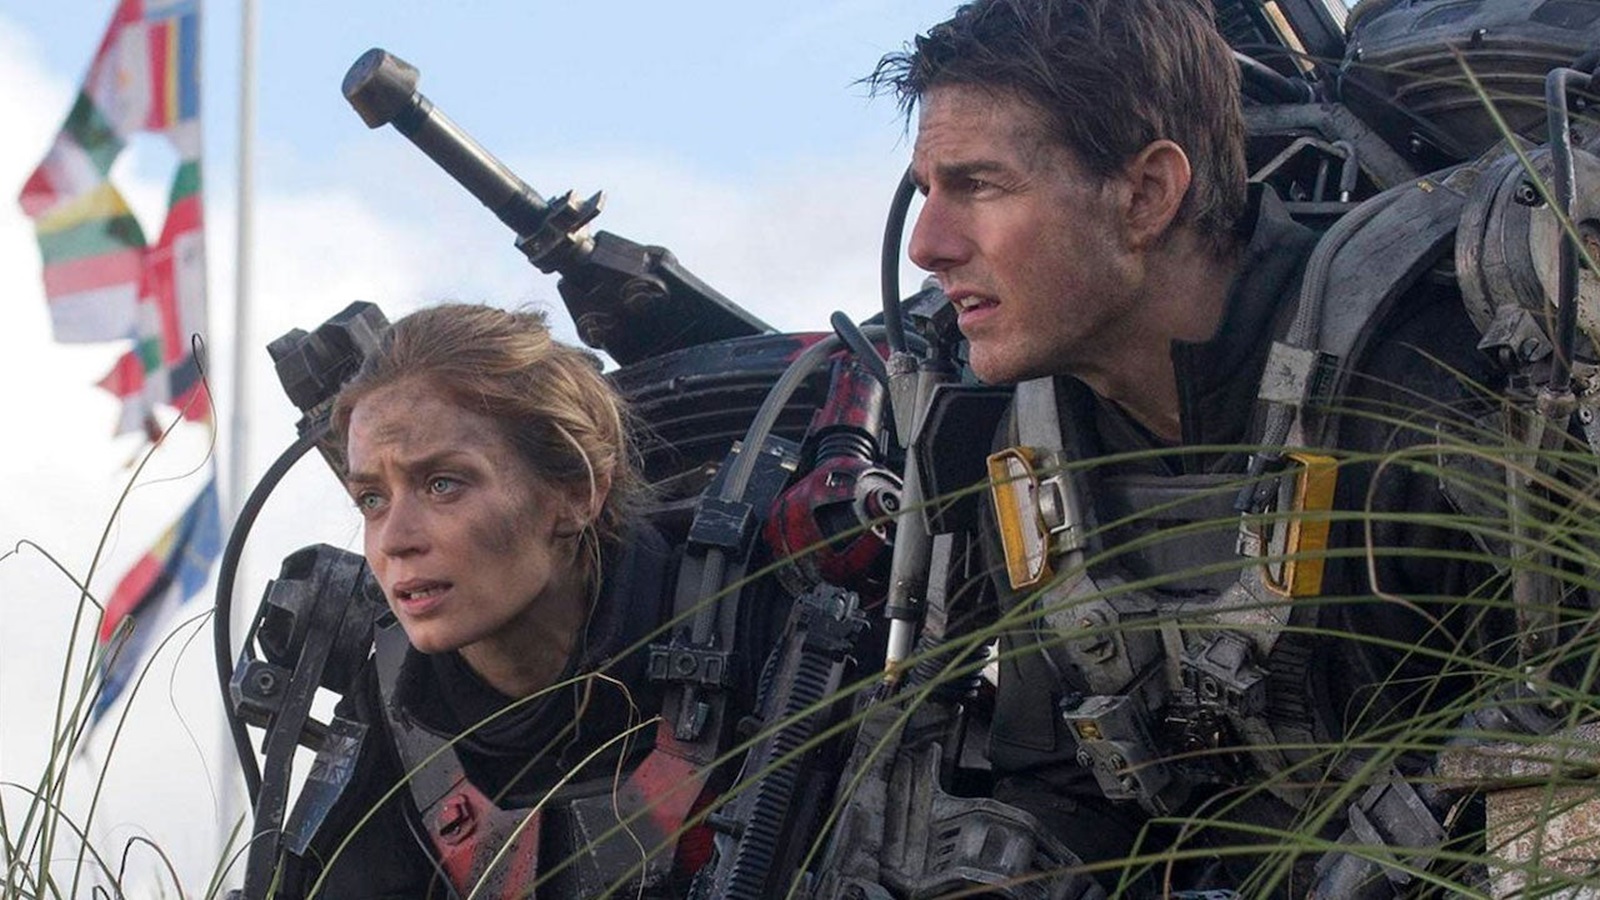 'Edge of Tomorrow 2' Emily Blunt: 'I've read the script, I hope there will be a sequel'